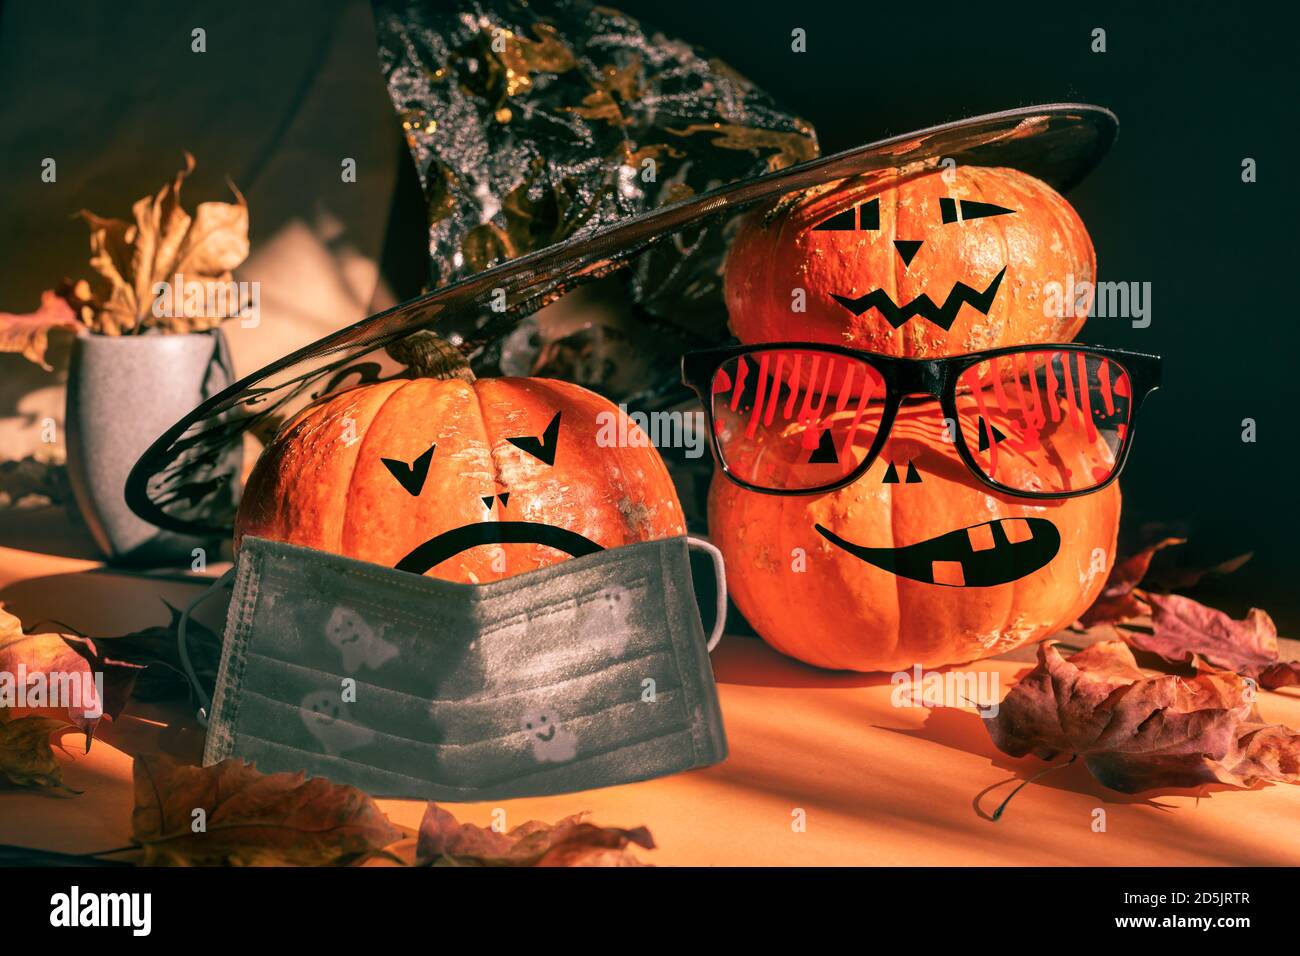 Three halloween pumpkins painted as Jack's lantern in festive bloody glasses, hat, face mask with leaves and shadows. Stock Photo